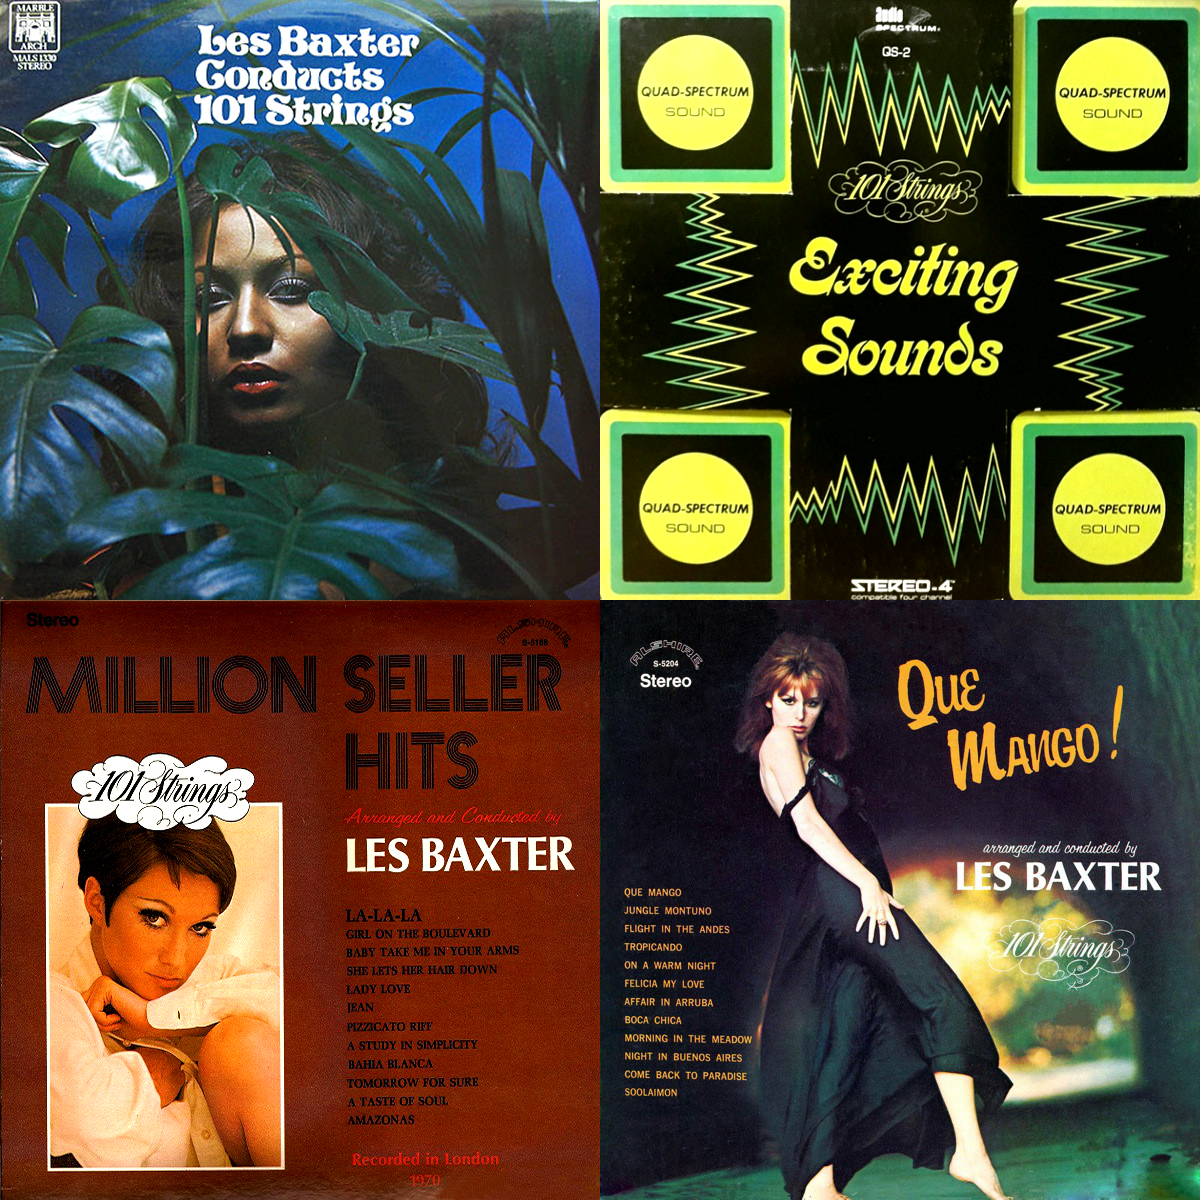 101-strings-les-baxter-4-covers-1200x1200px